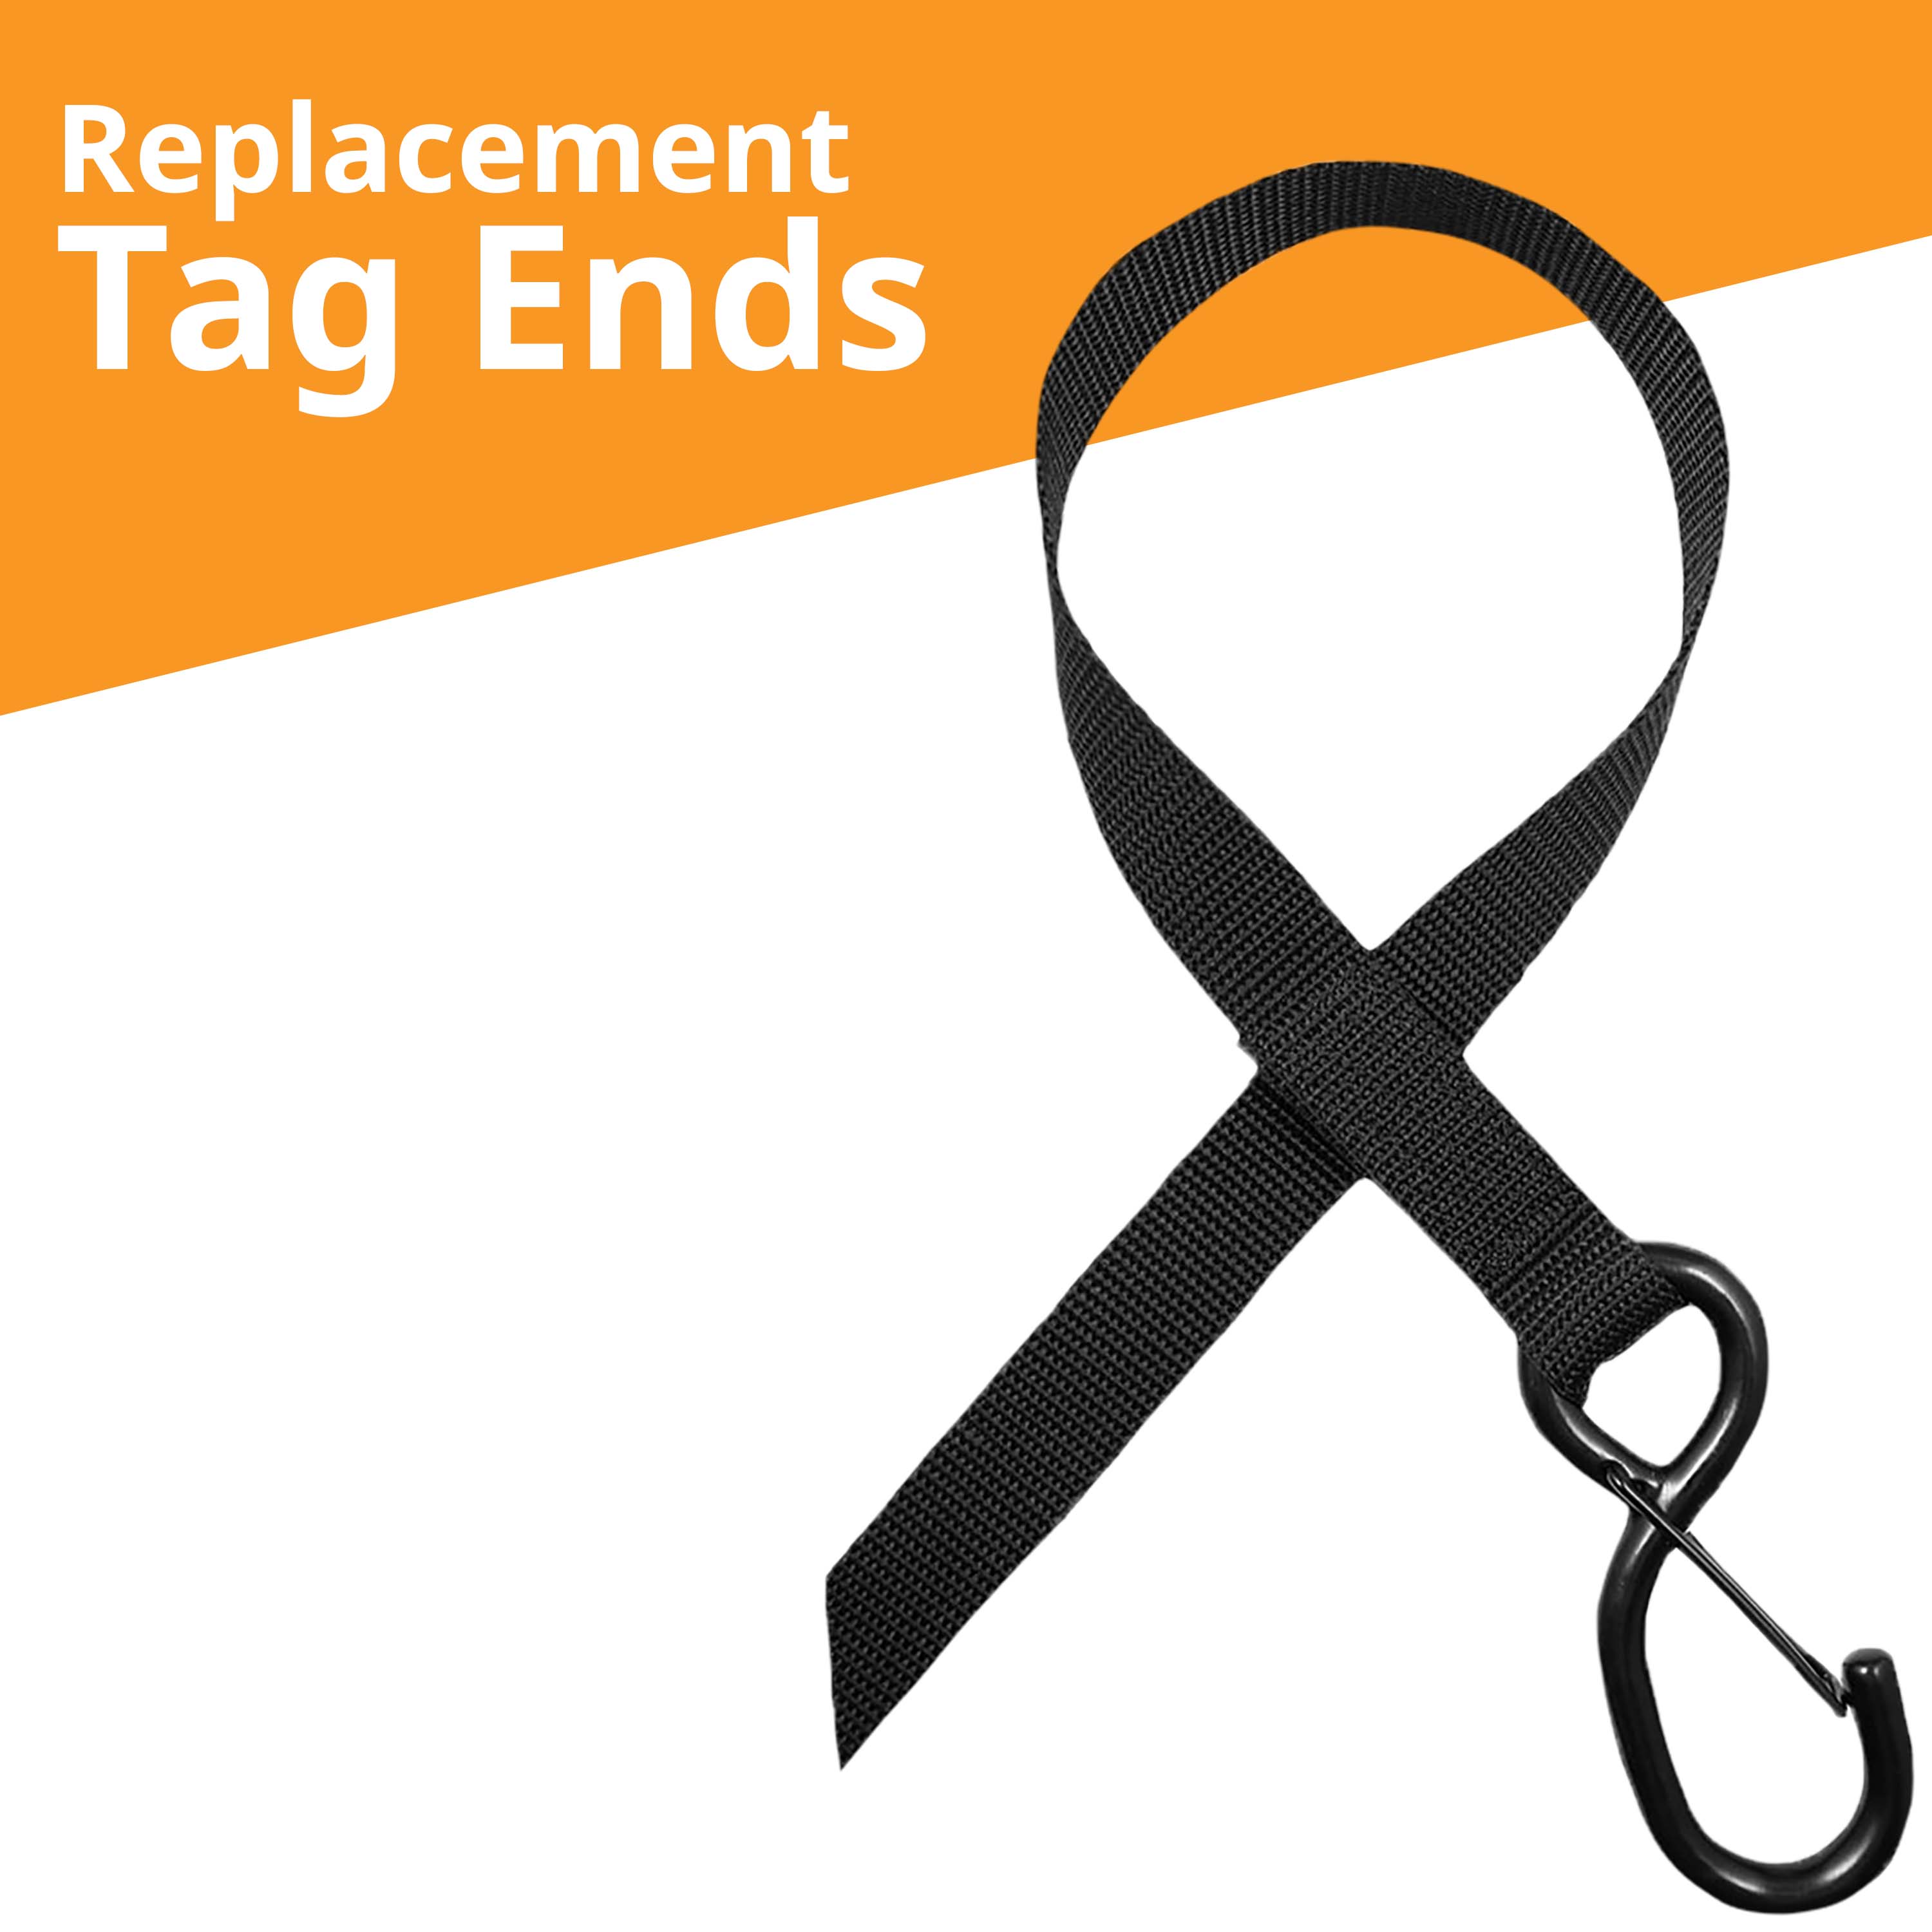 Replacement Tag Ends